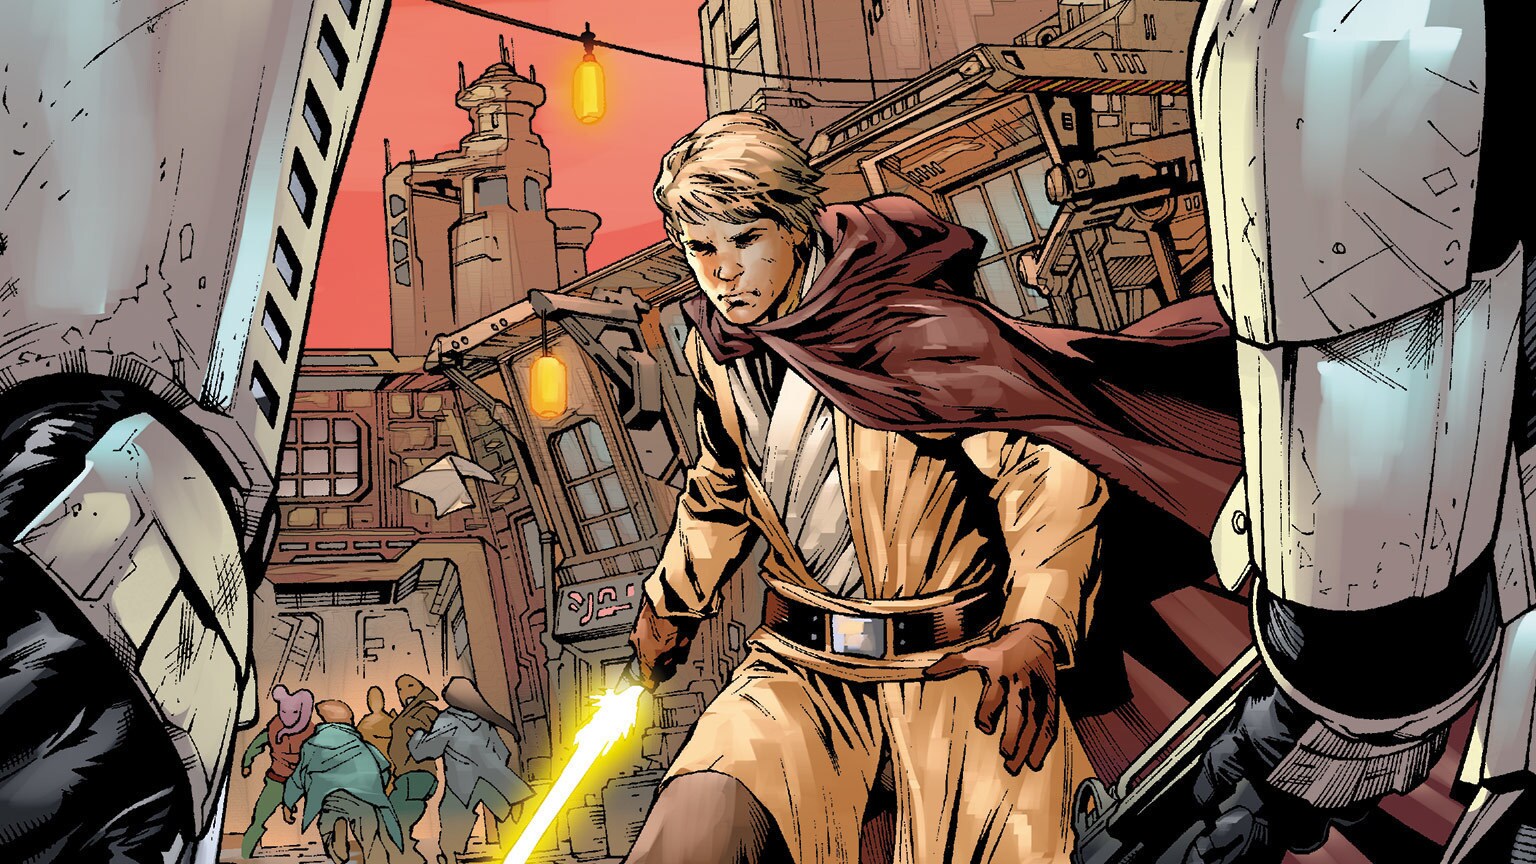 Luke Continues His Jedi Journey, and More in Marvel’s November 2021 Star Wars Comics - Exclusive